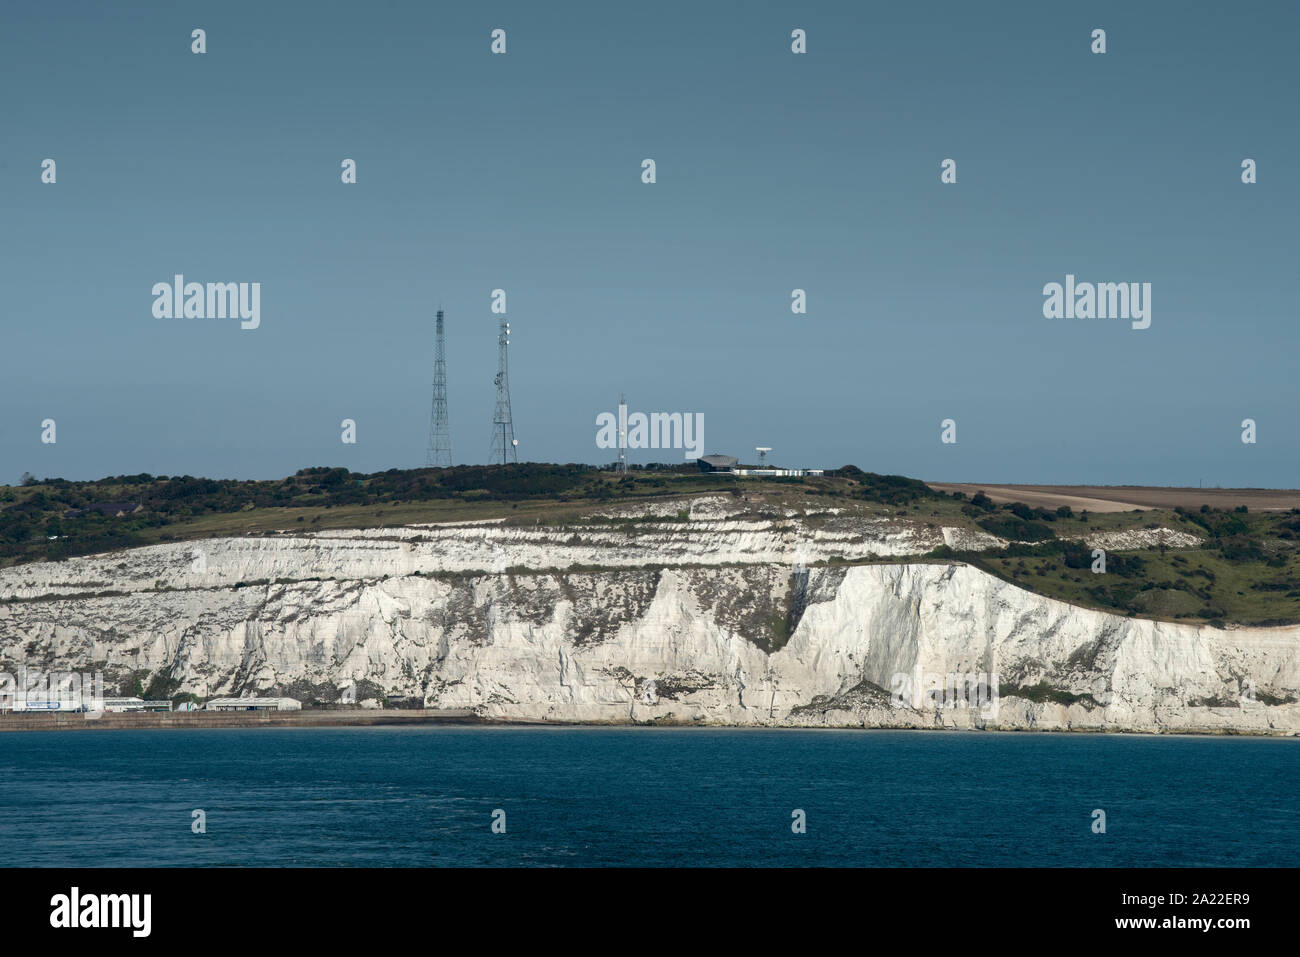 Dover Kent England. The White Cliffs viewed from a cross chanel ferry to France. Sept 2019 Stock Photo